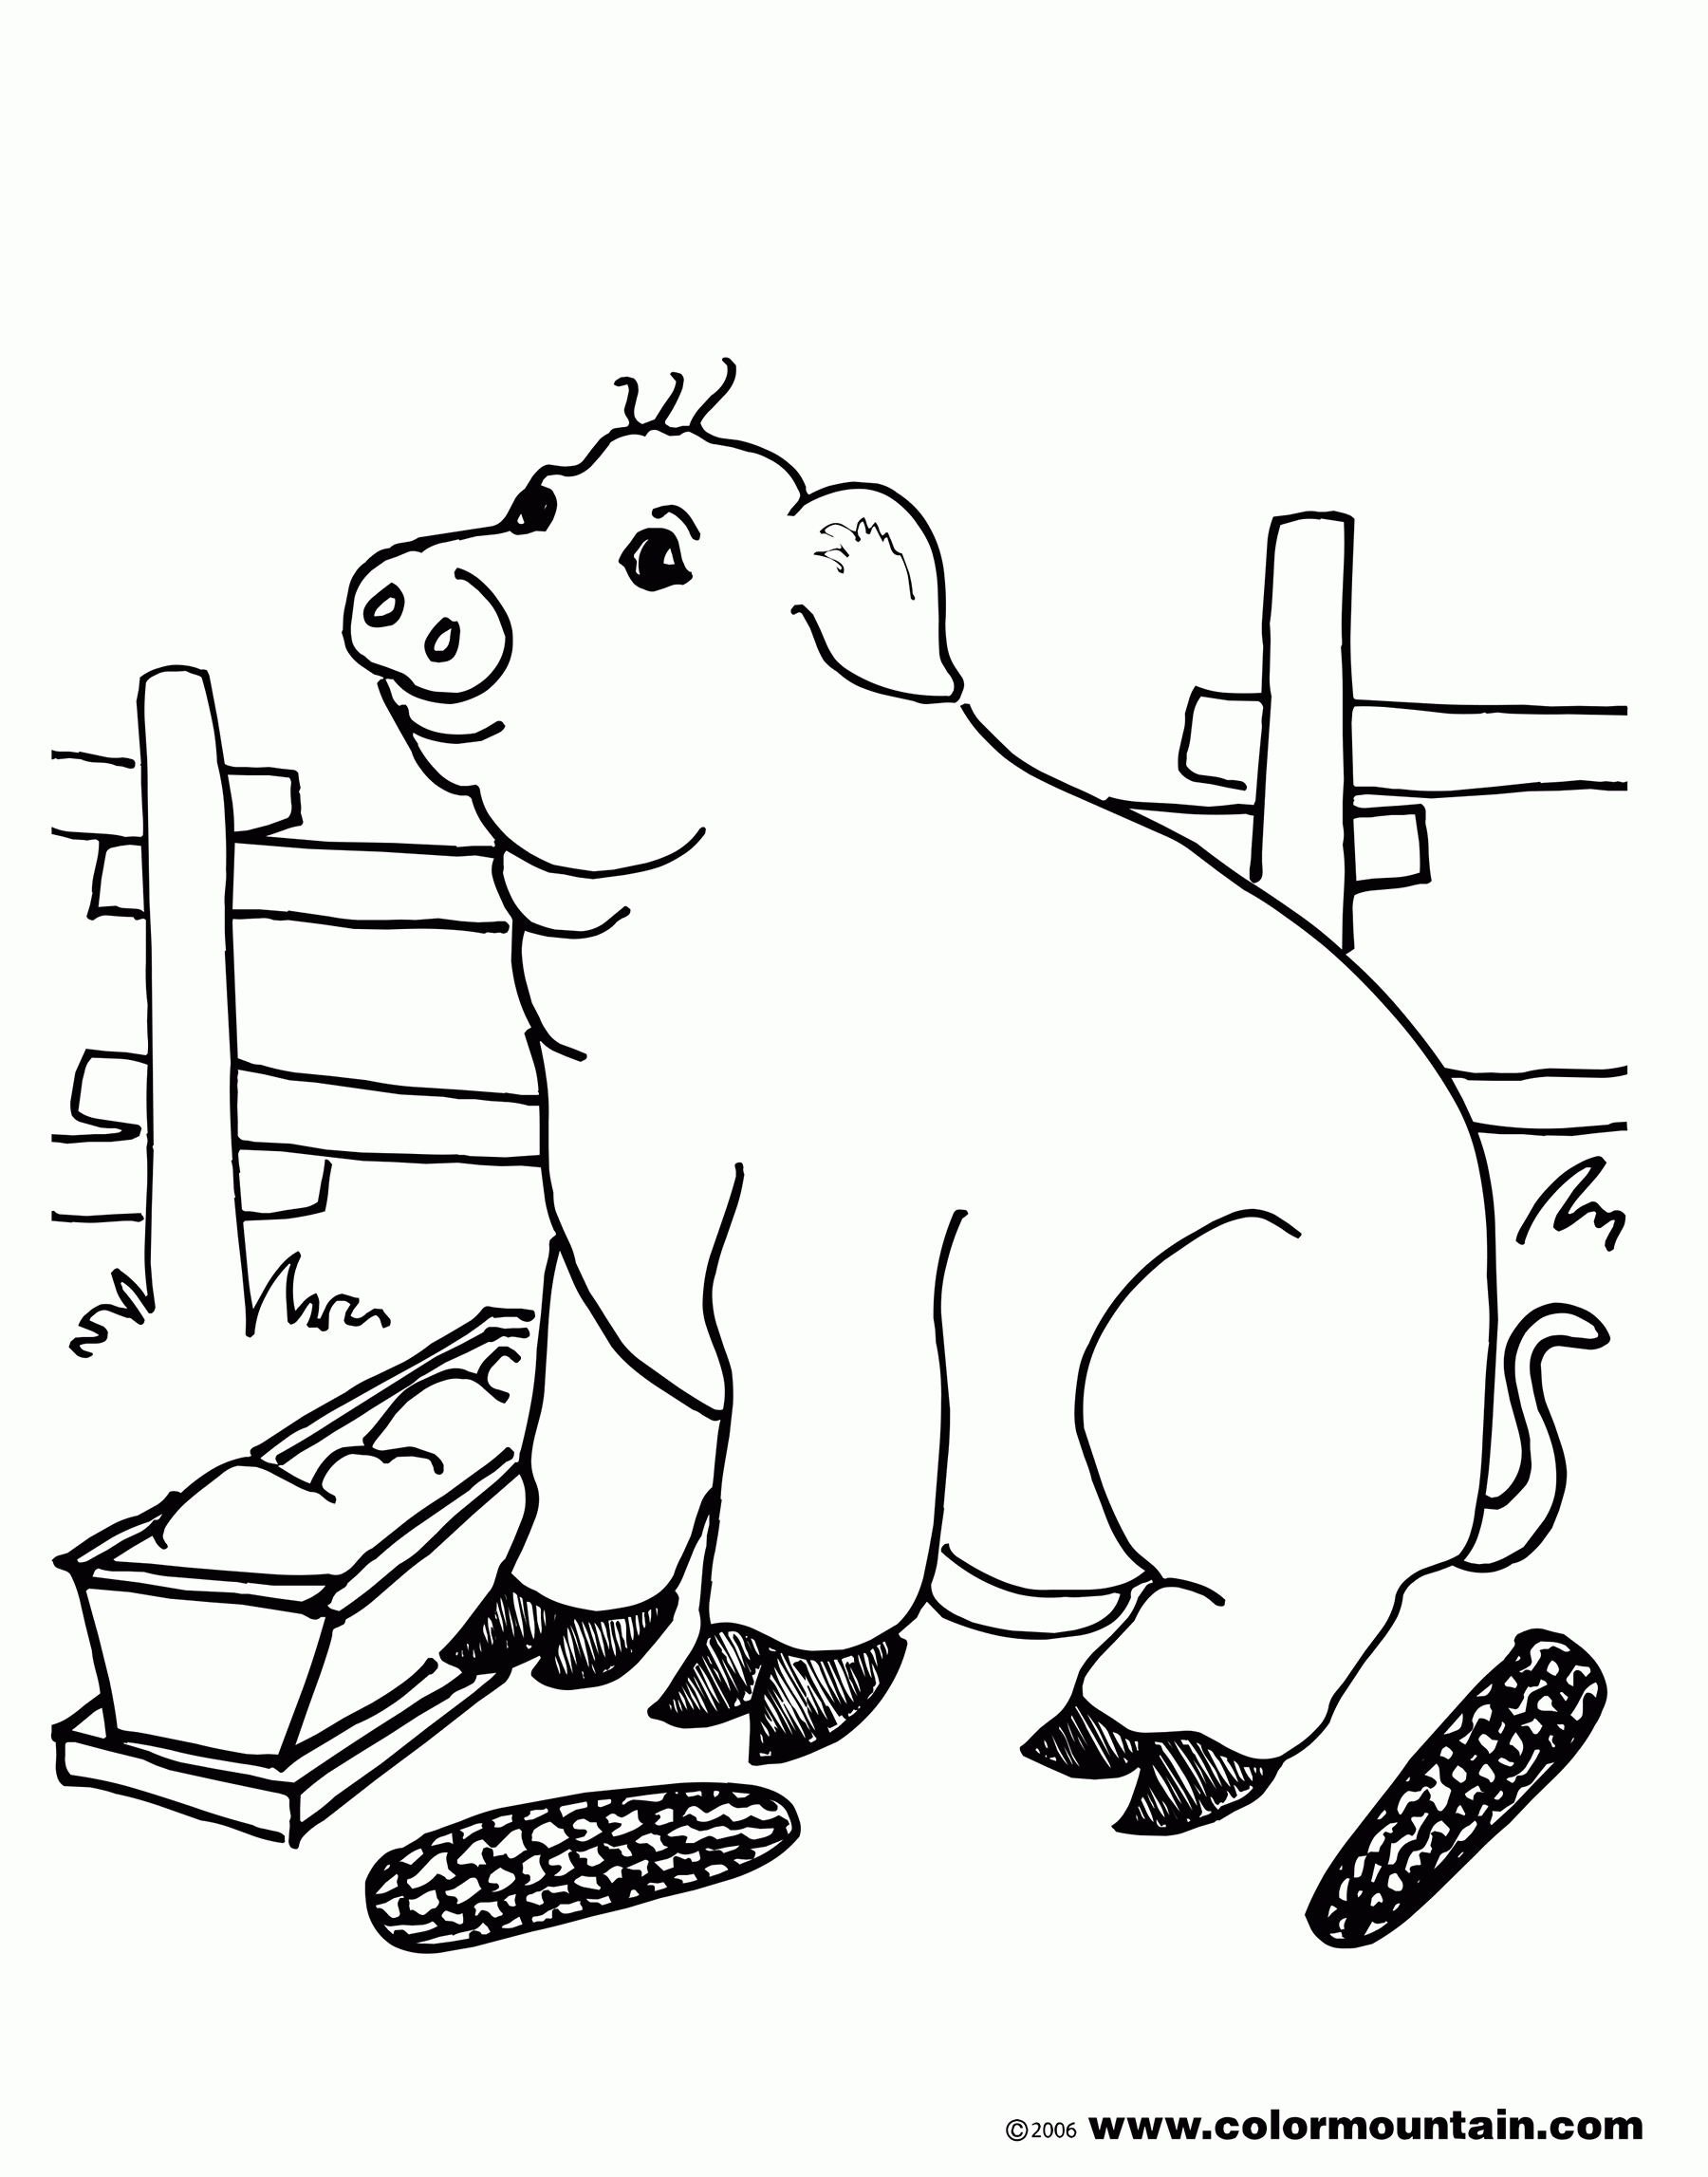 Pig Coloring Page - Create A Printout Or Activity